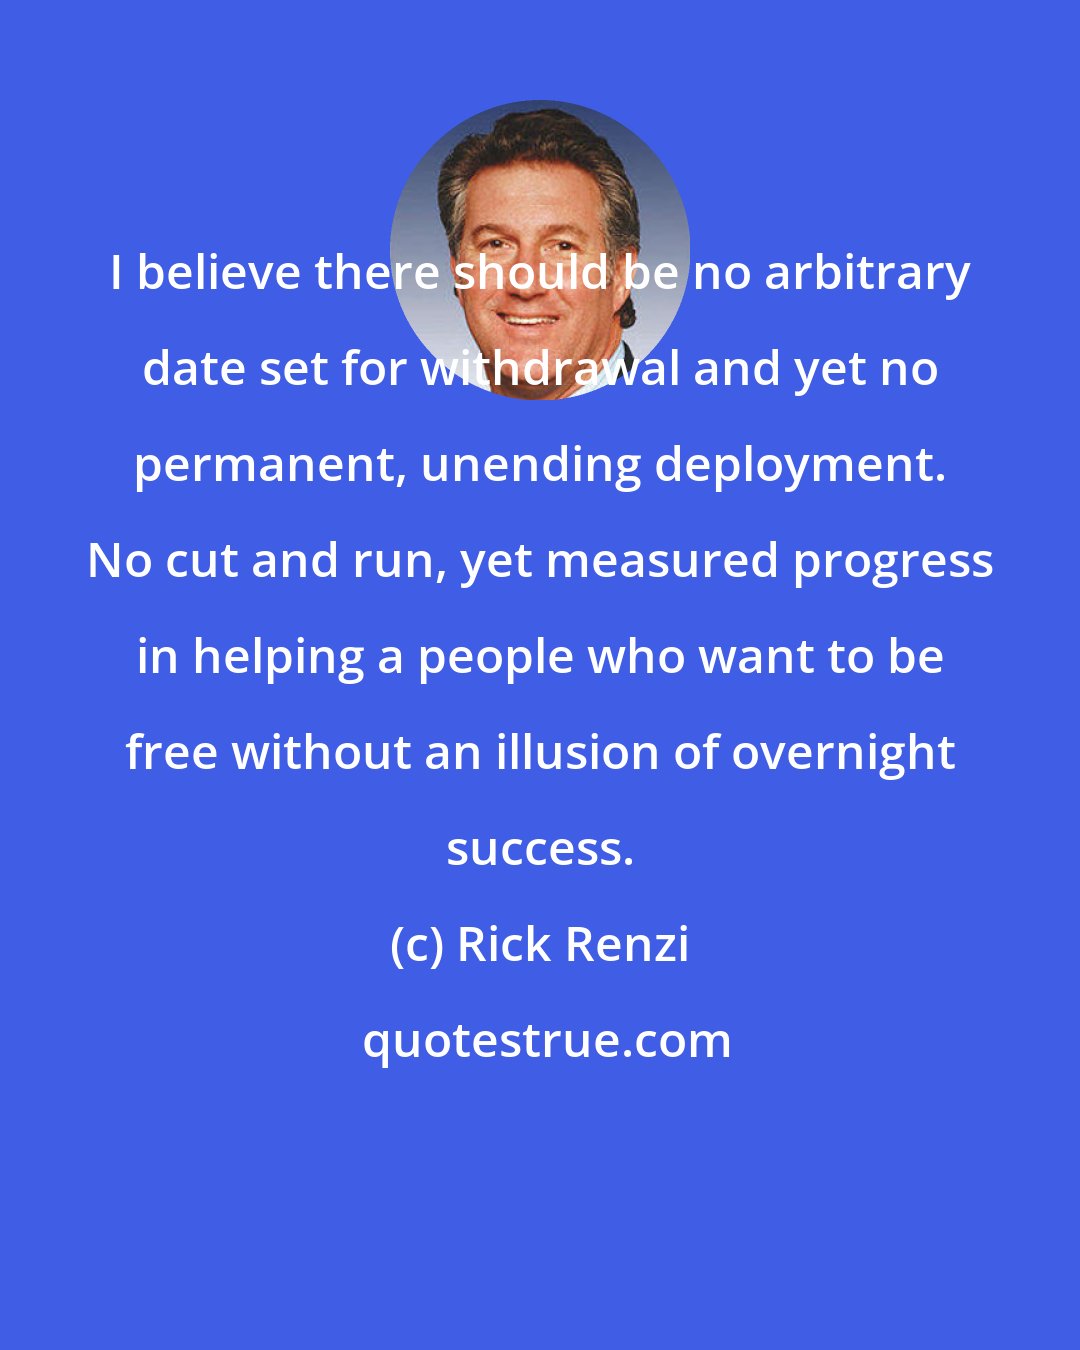 Rick Renzi: I believe there should be no arbitrary date set for withdrawal and yet no permanent, unending deployment. No cut and run, yet measured progress in helping a people who want to be free without an illusion of overnight success.